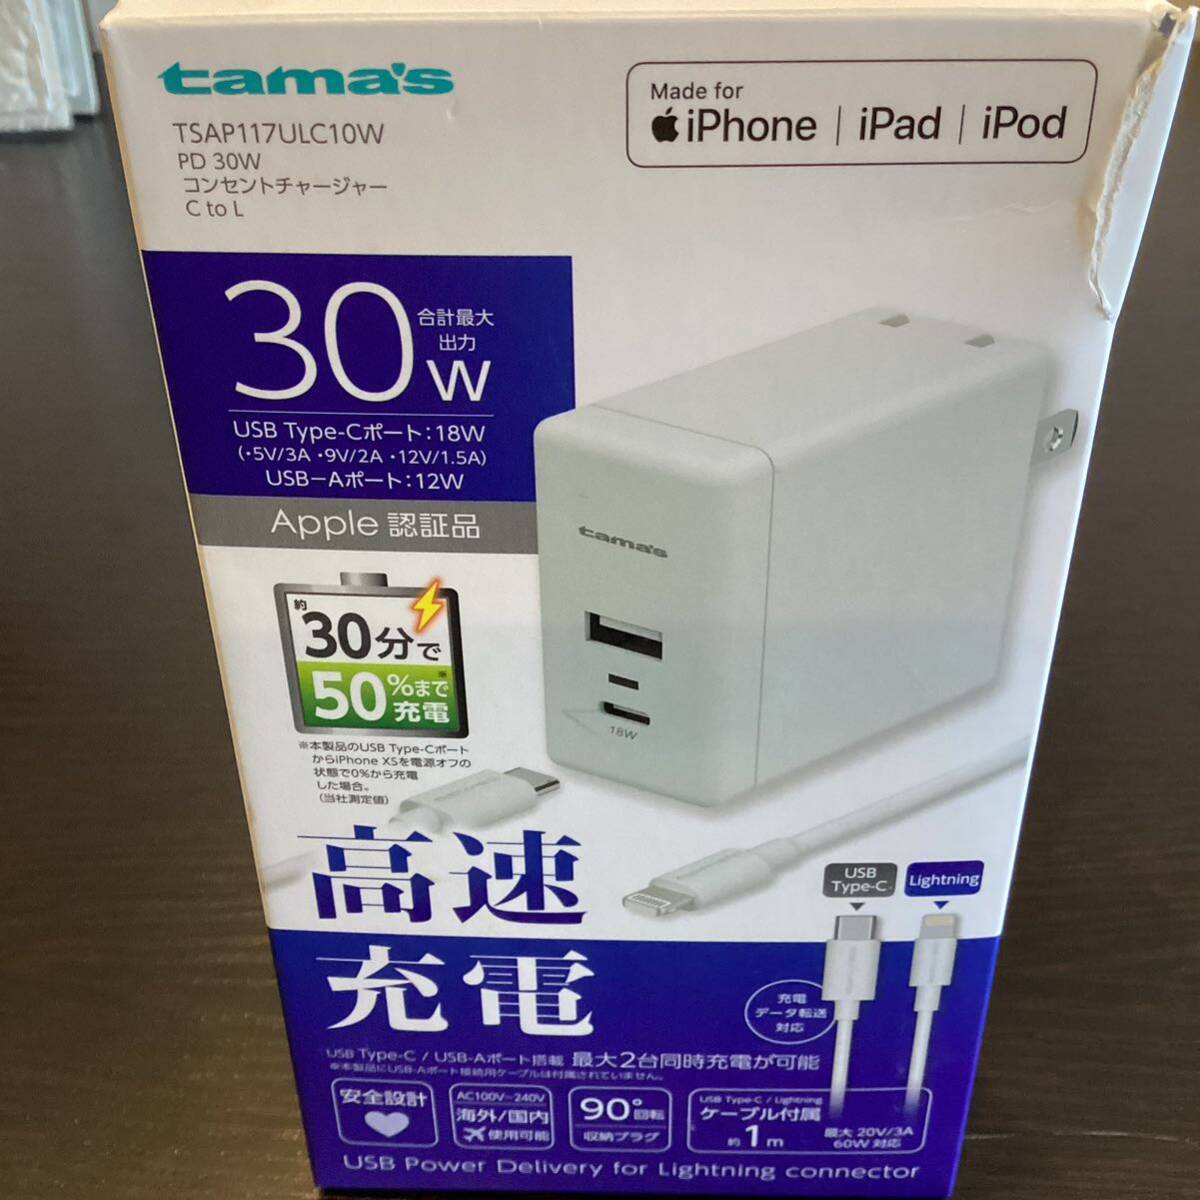 [8800] PD30w outlet charger TSAP117 ULC 10w Tama electron type-c USB charger 